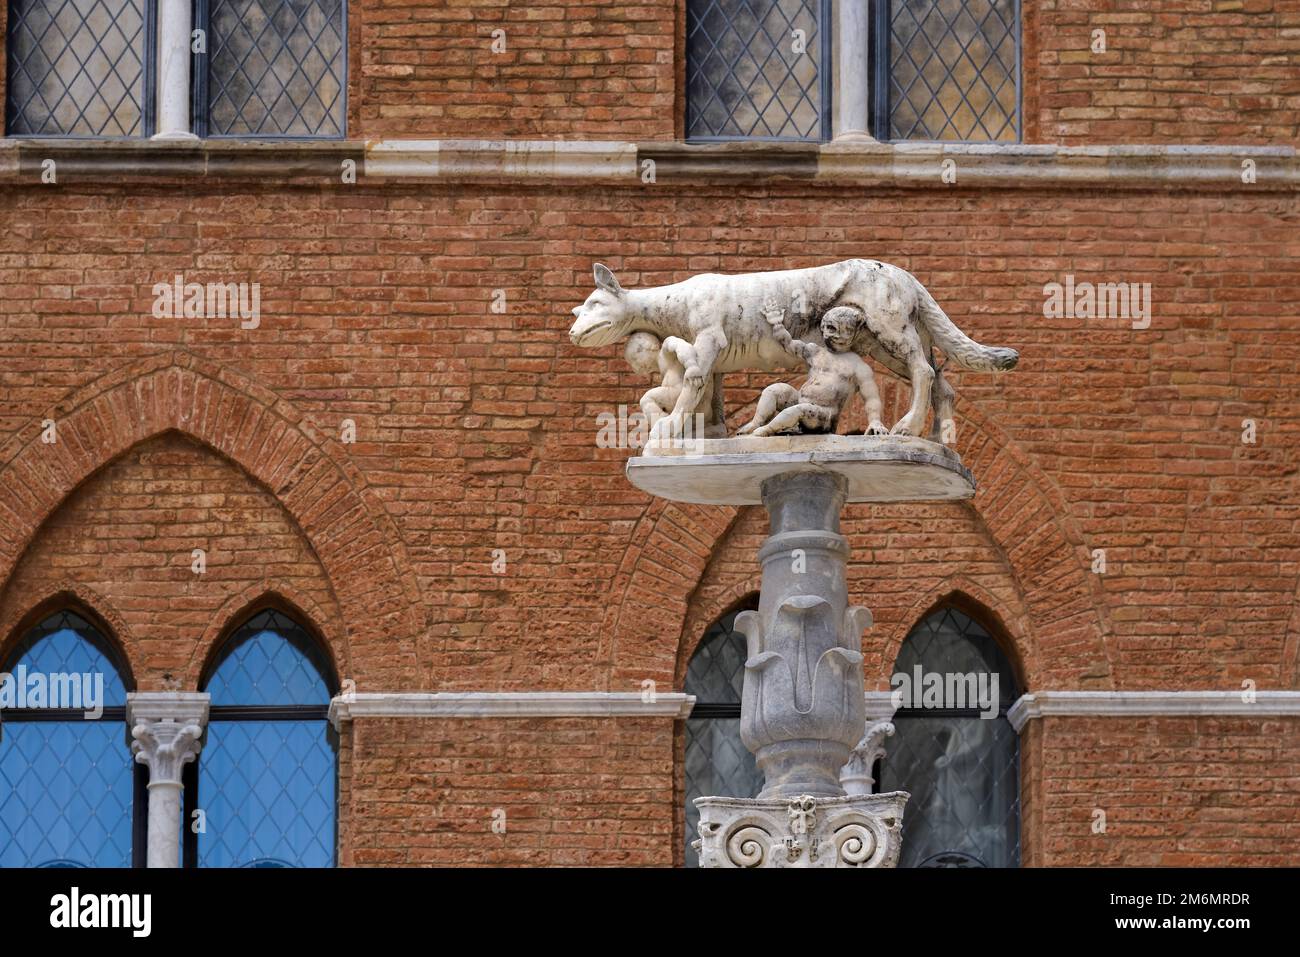 SIENA, TUSCANY, ITALY - MAY 18 : She-wolf with infants Romulus and Remus near the Cathedral in Siena, Tuscany, Italy on May 18, Stock Photo